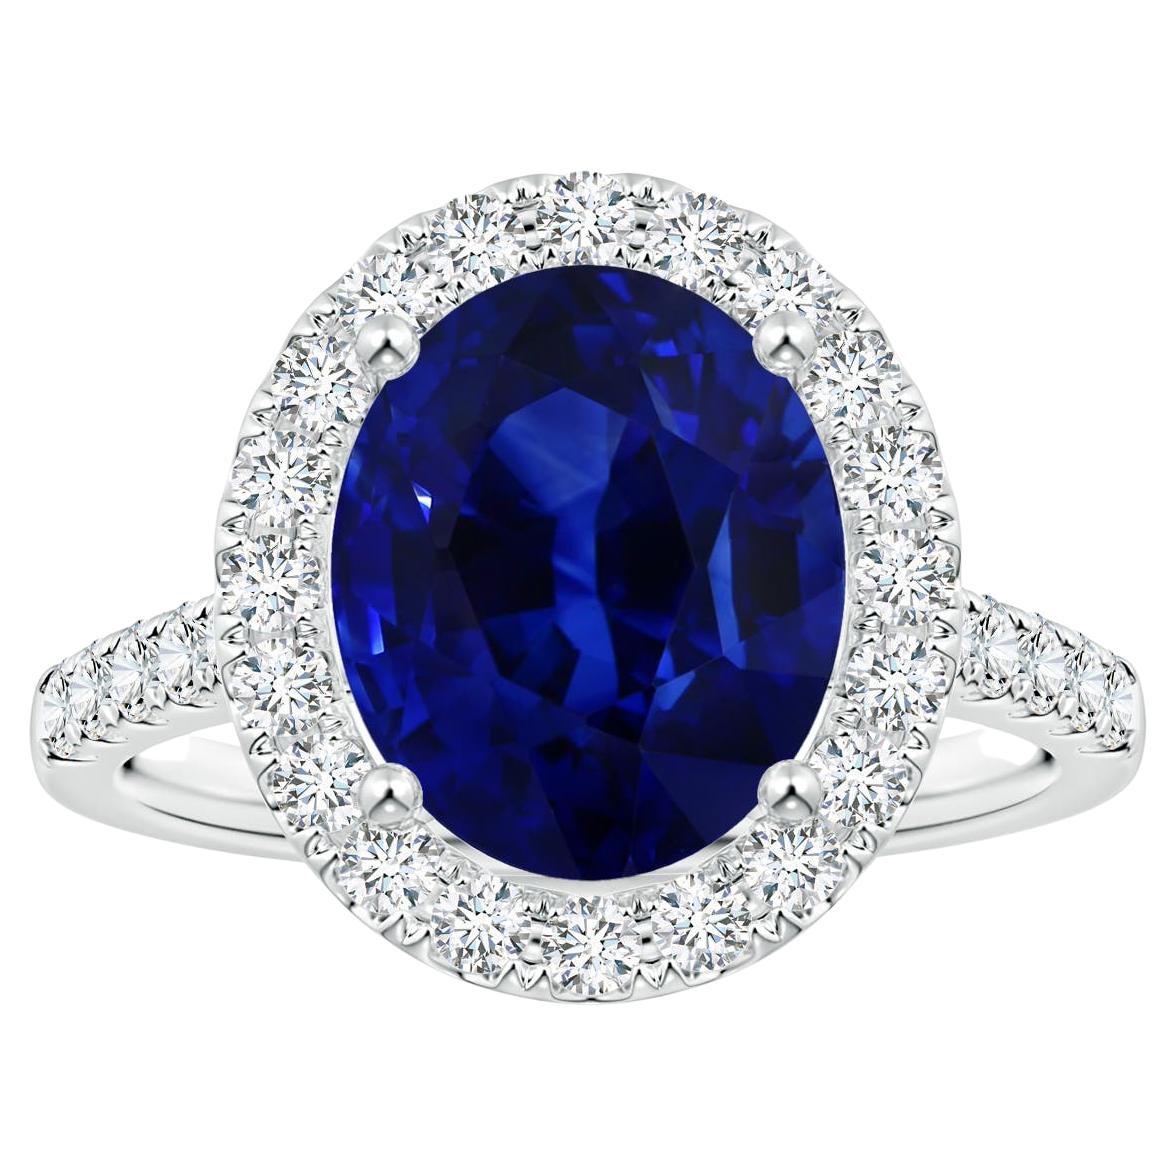 For Sale:  Angara Gia Certified Natural Blue Sapphire Halo Ring in White Gold with Diamonds